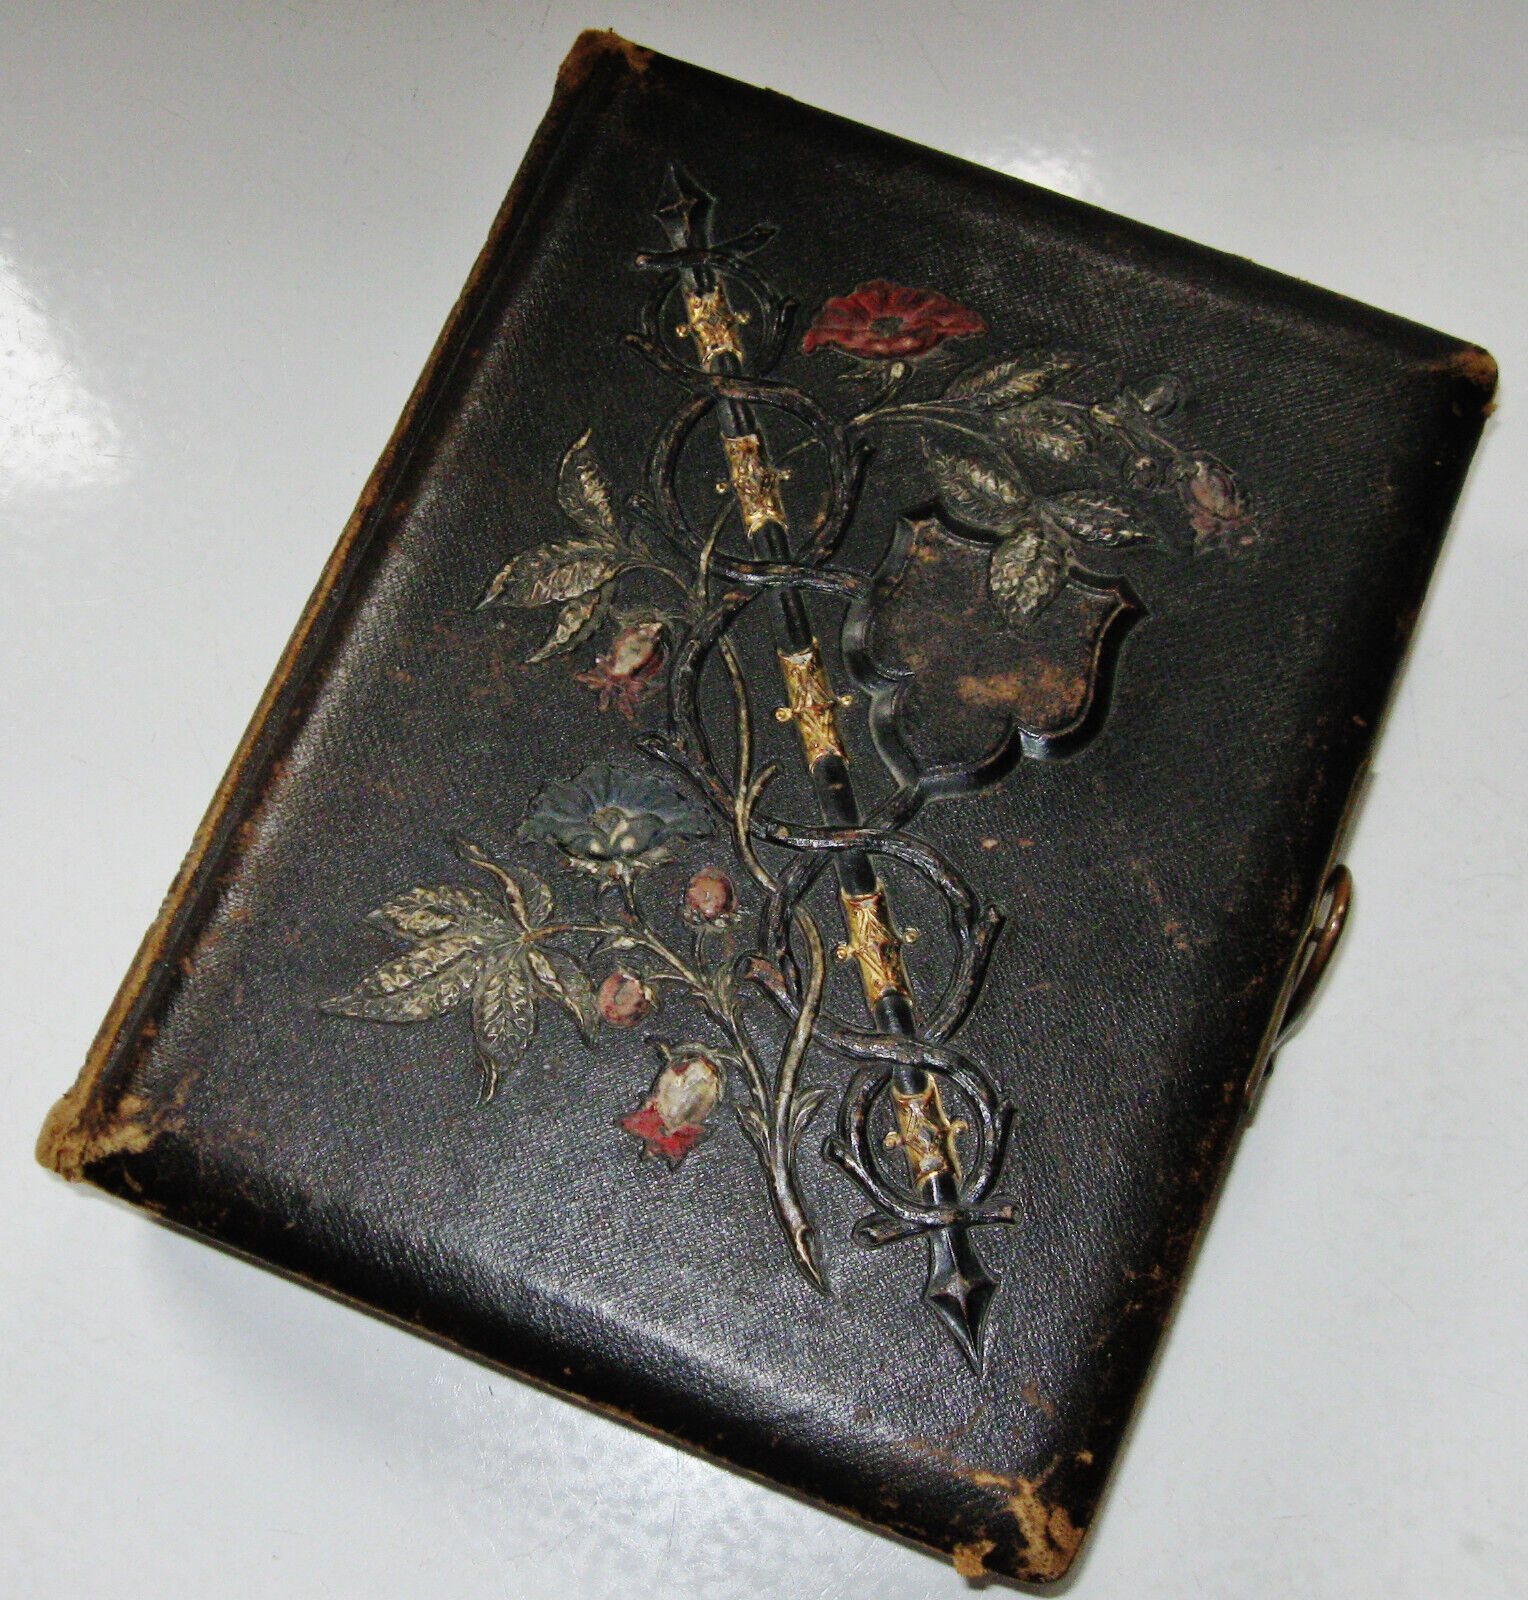 EMPTY ANTIQUE LEATHER PHOTO ALBUM HAS ROOM FOR SEVERAL SIZE PHOTOS